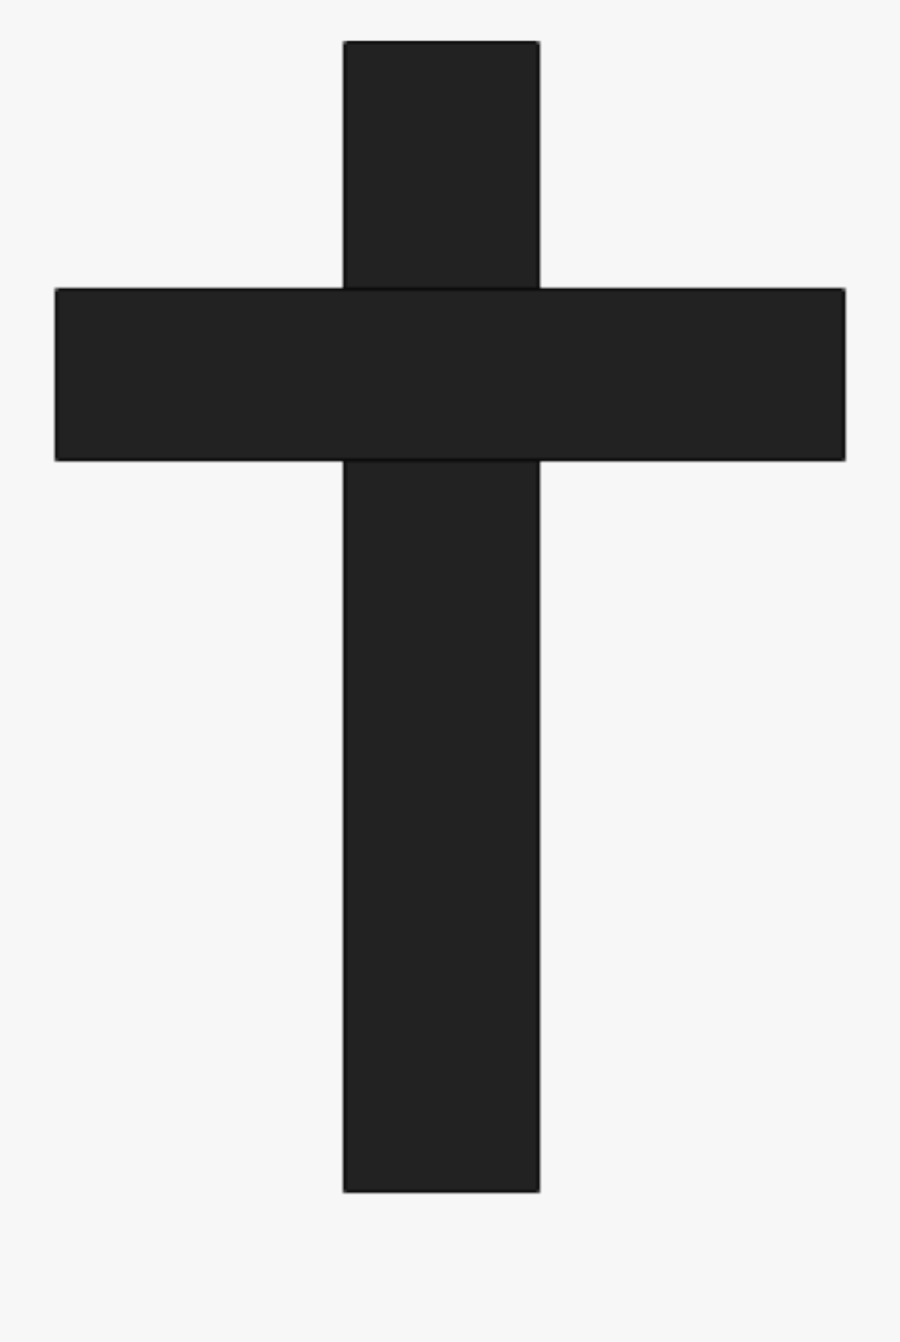 Ireland Big Image Png - Silhouette Of A Cross, Transparent Clipart